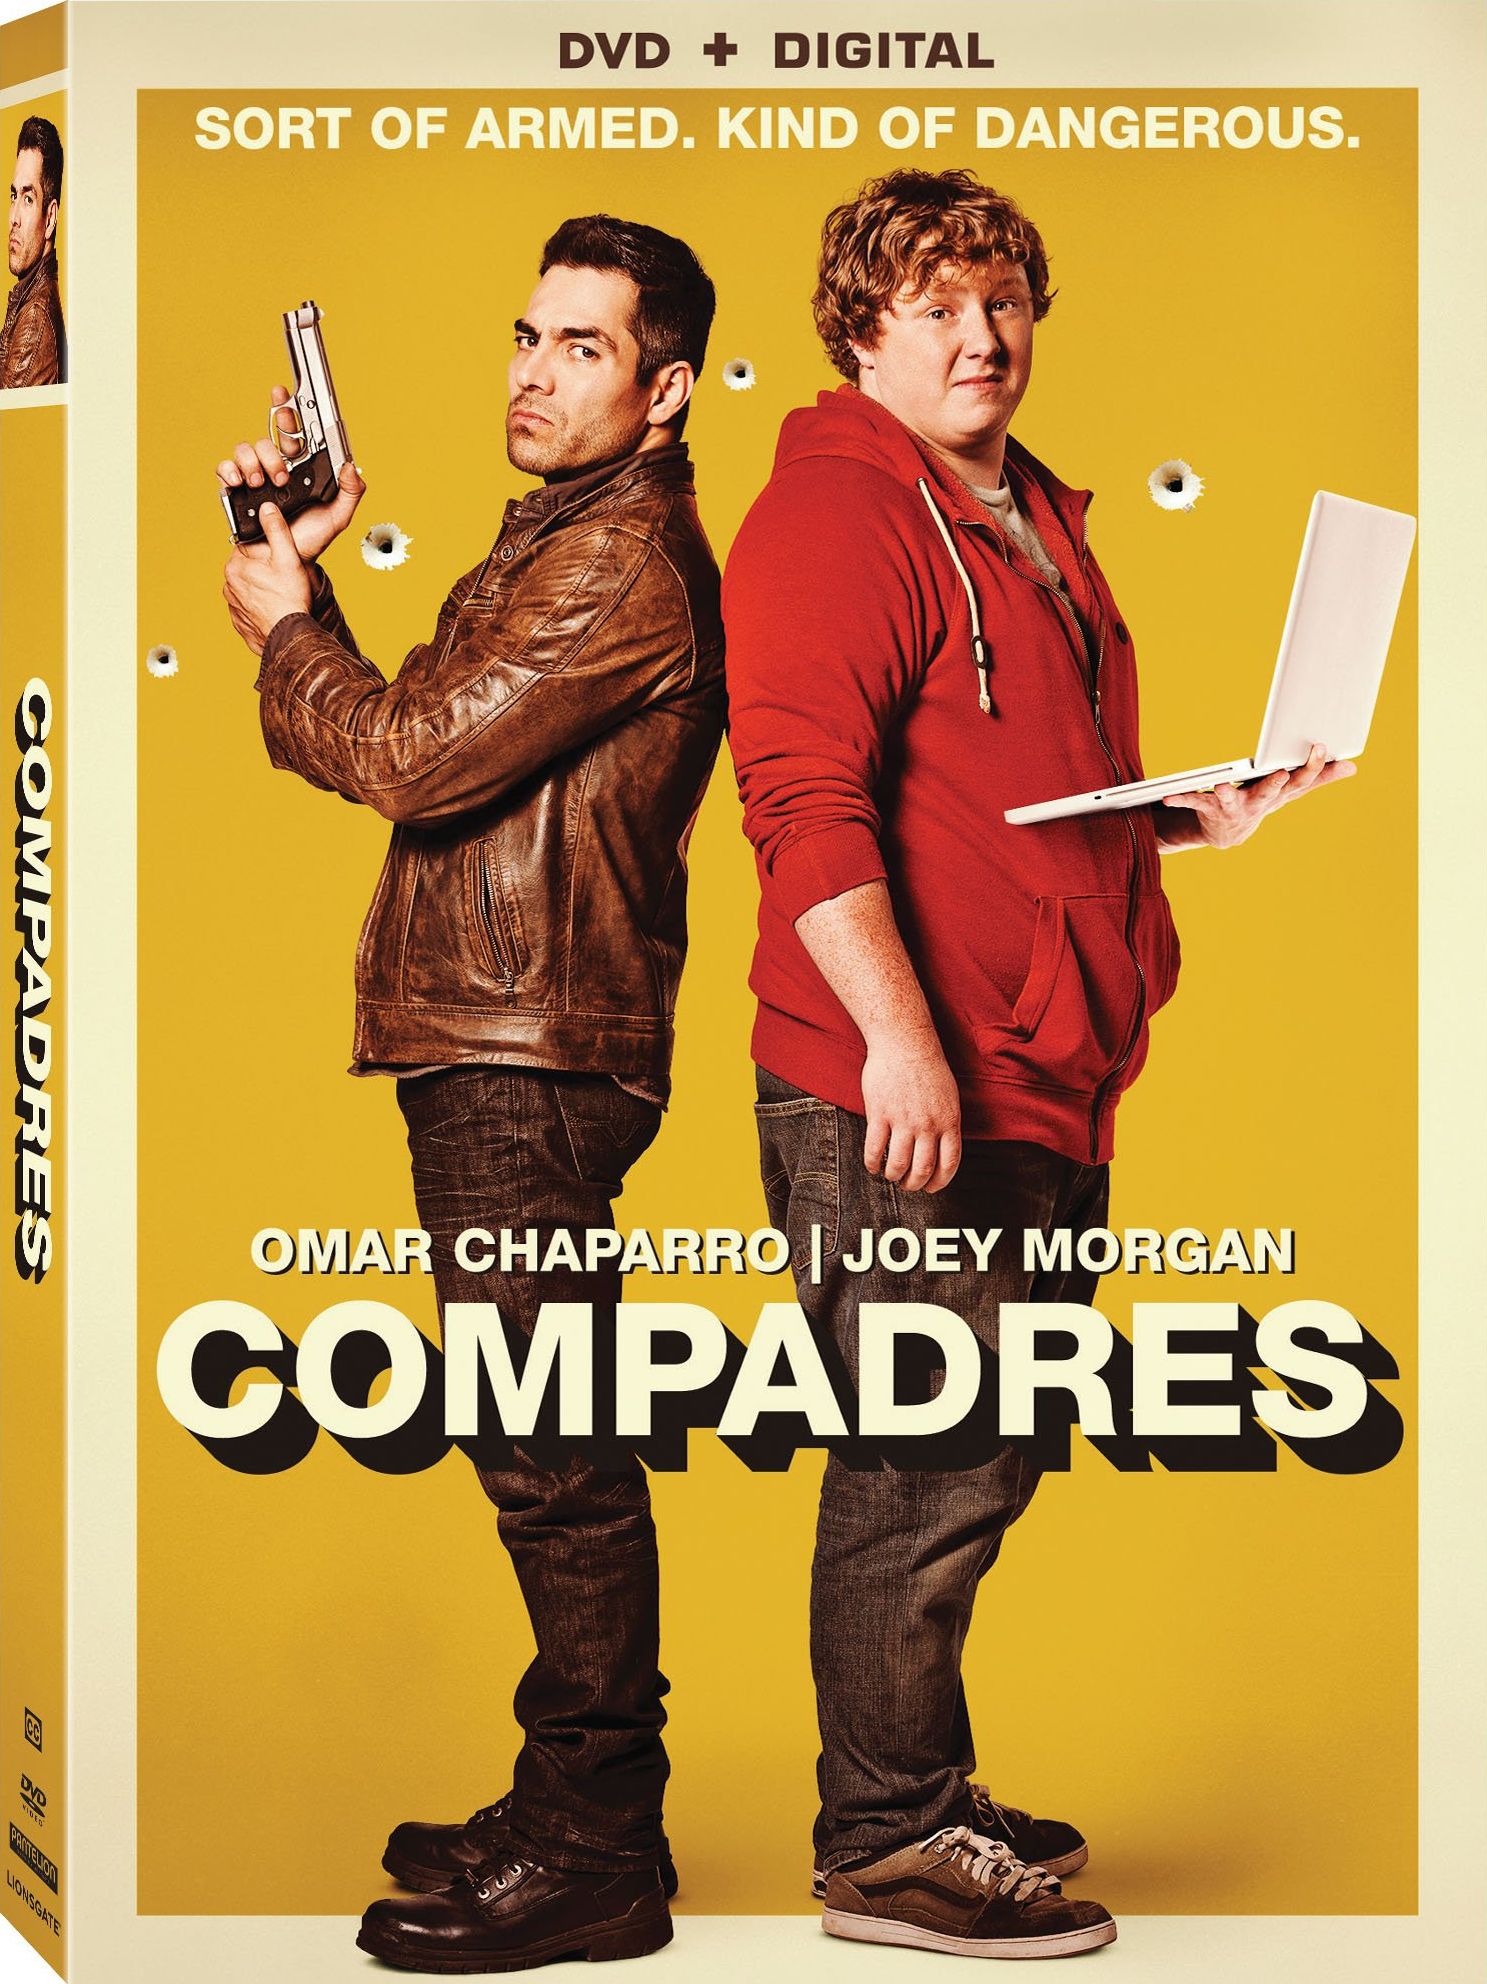 Compadres DVD Release Date September 6, 20161487 x 1984